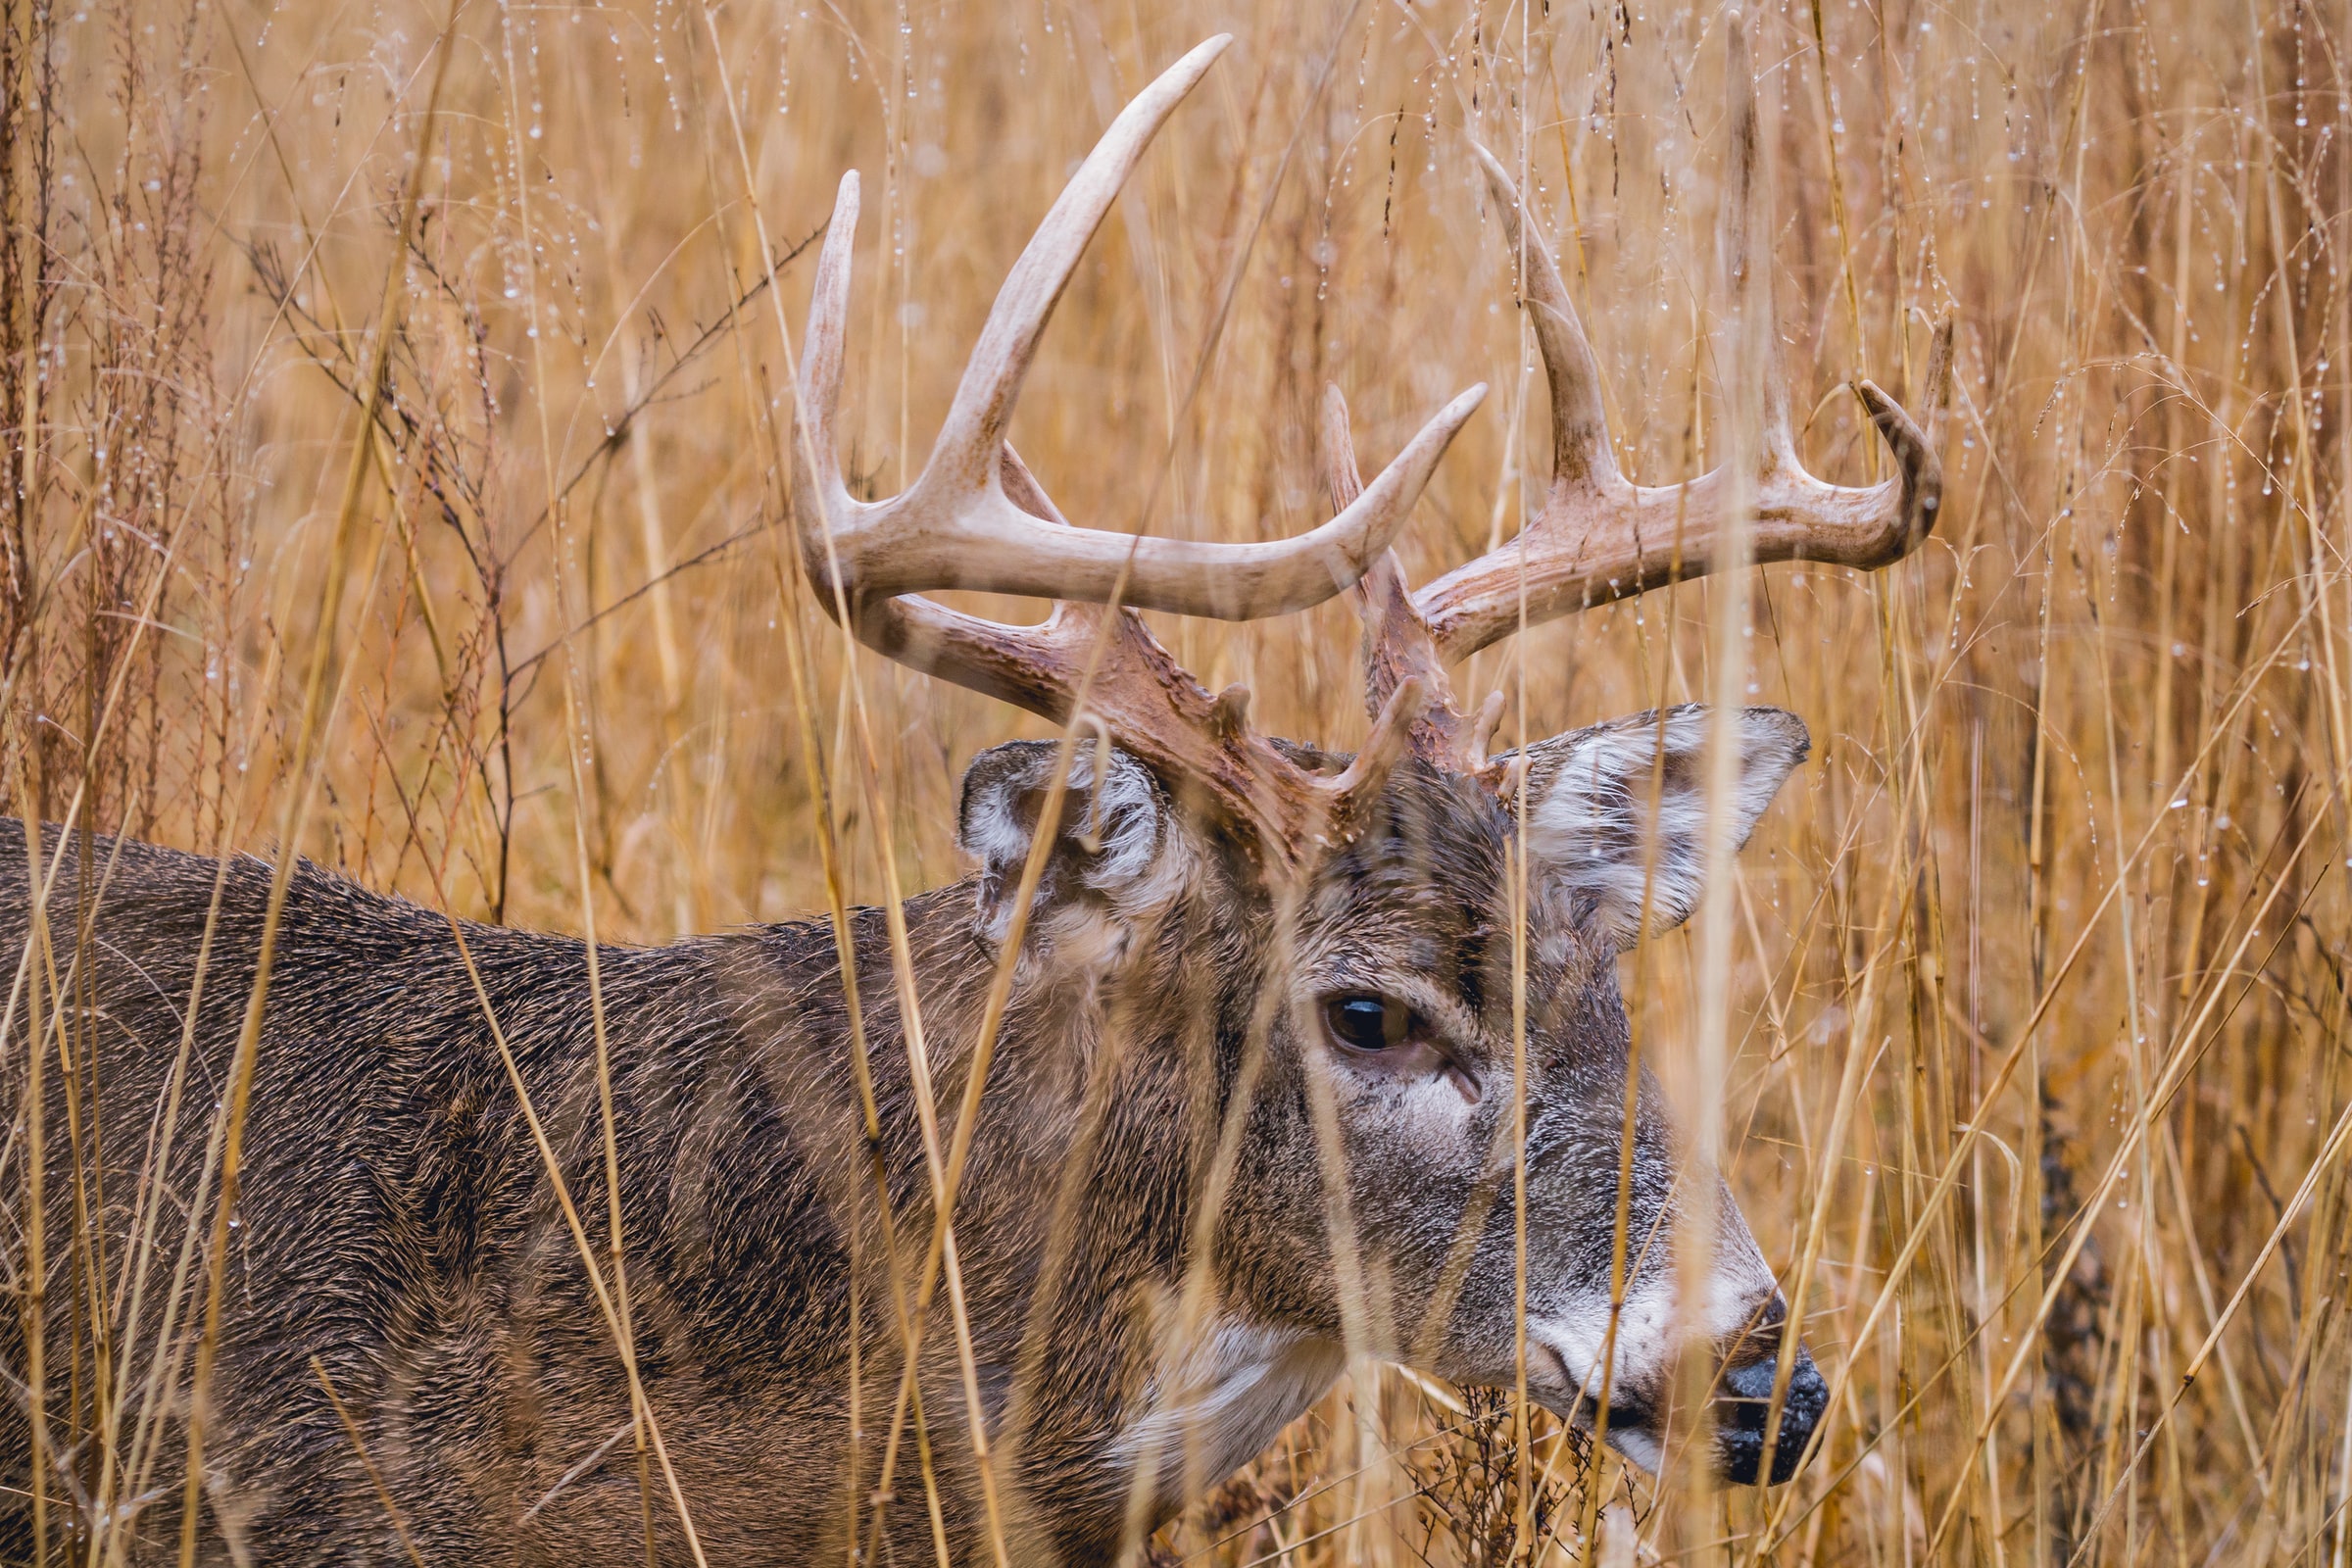 This was one of the best deer seasons in Maine history.